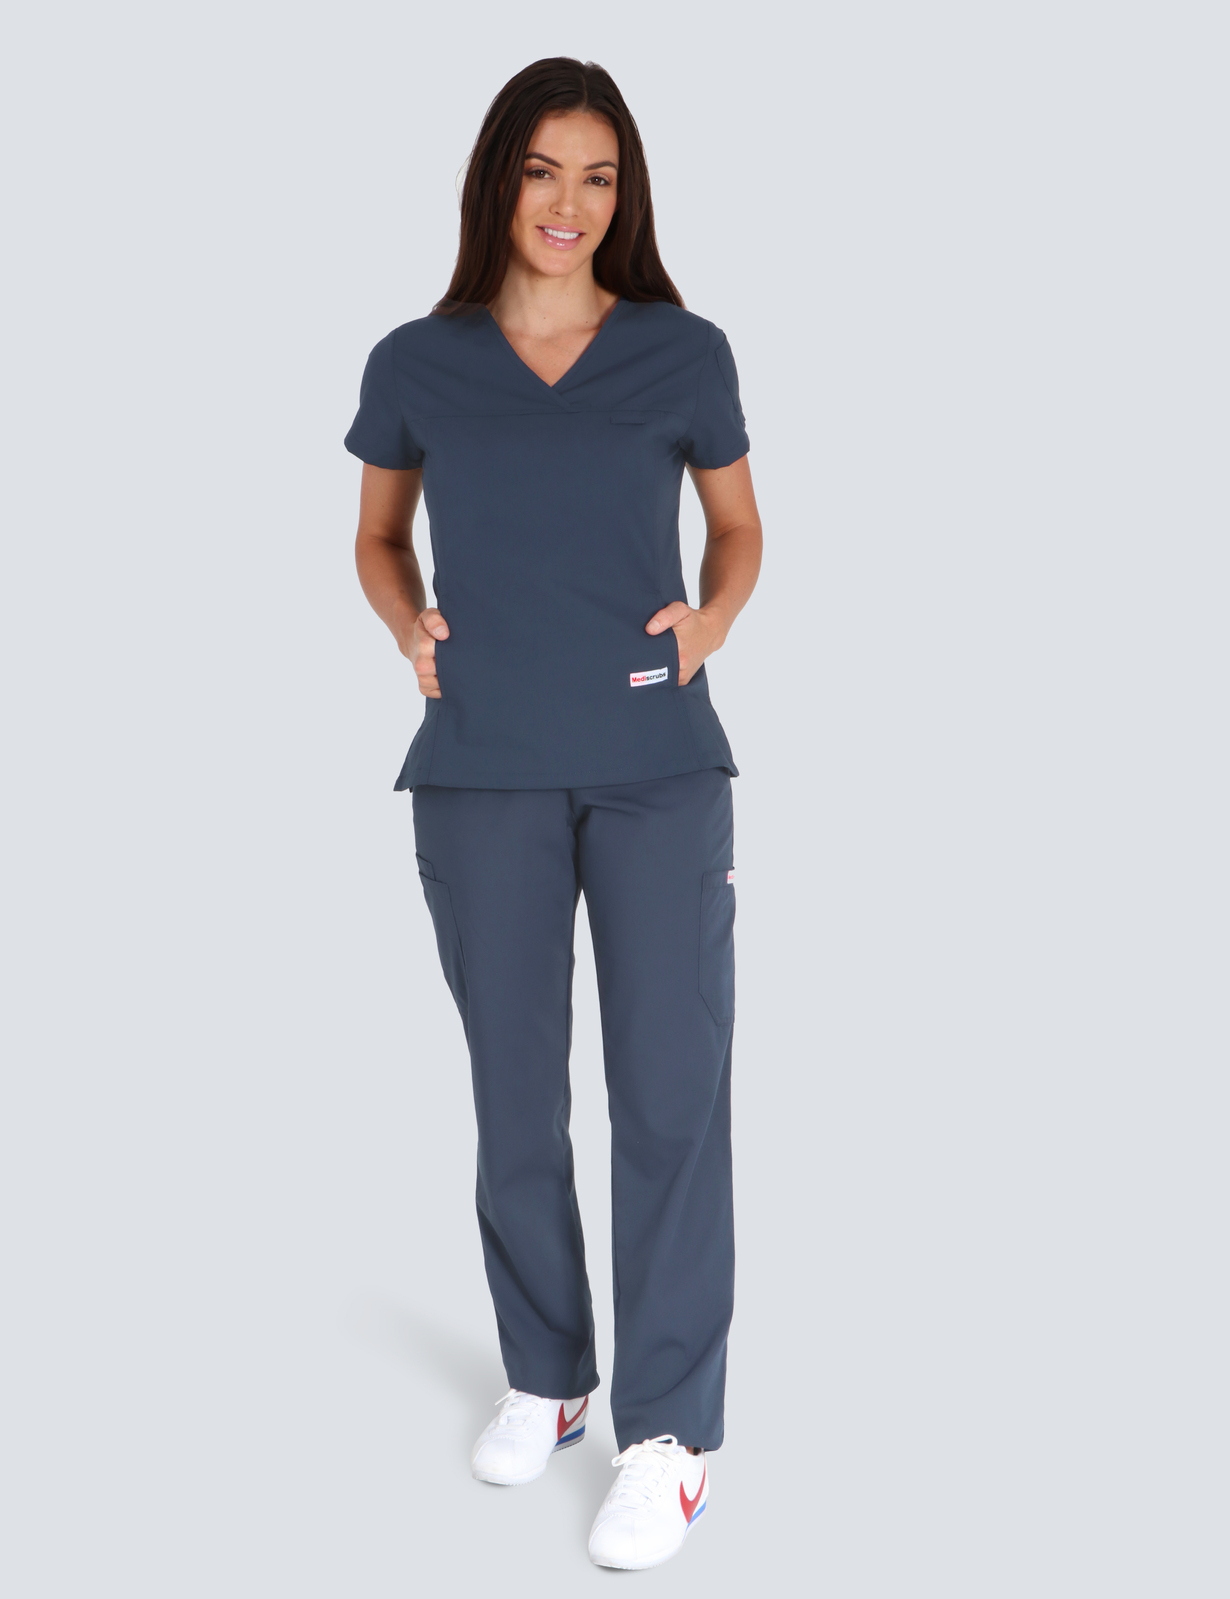 Registered Nurse Uniform Set Bundle (Women's Fit Solid Top and Cargo Pants in Red incl Logos)